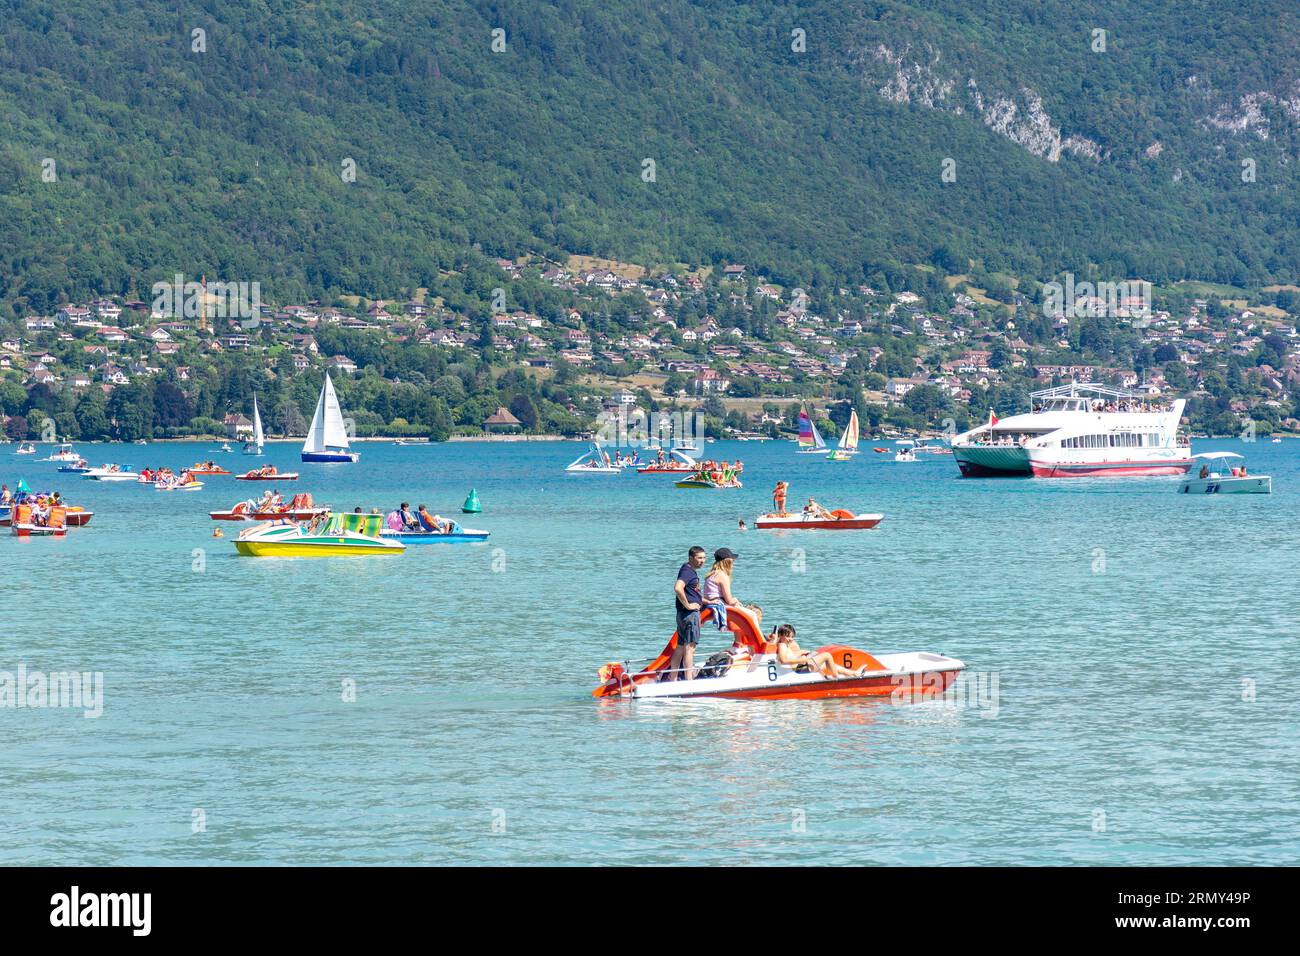 Boating on Lake Annecy (Lac d'Annecy), Annecy, Haute-Savoie, Auvergne-Rhône-Alpes, France Stock Photo